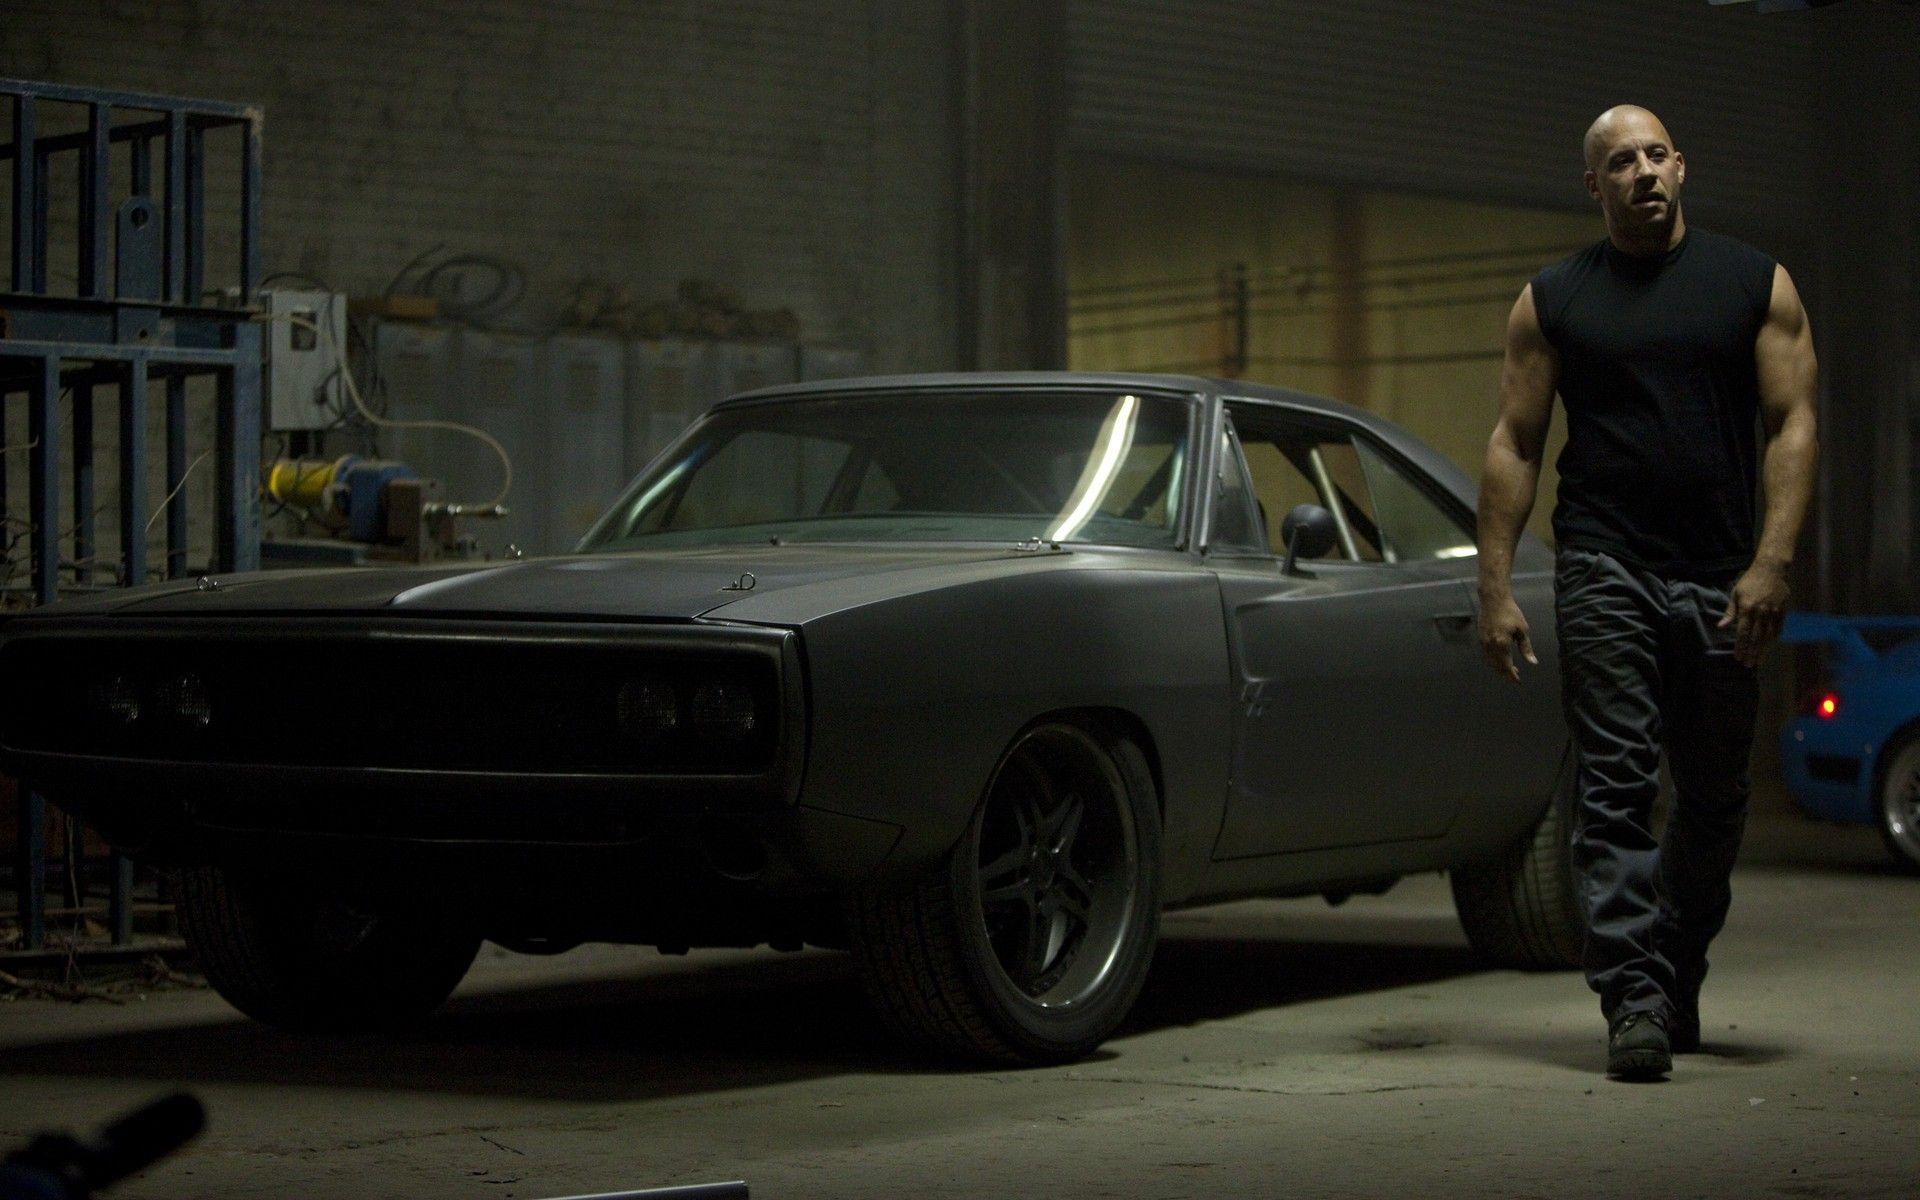 movies cars Dodge actors Vin Diesel Fast and Furious Dodge Charger